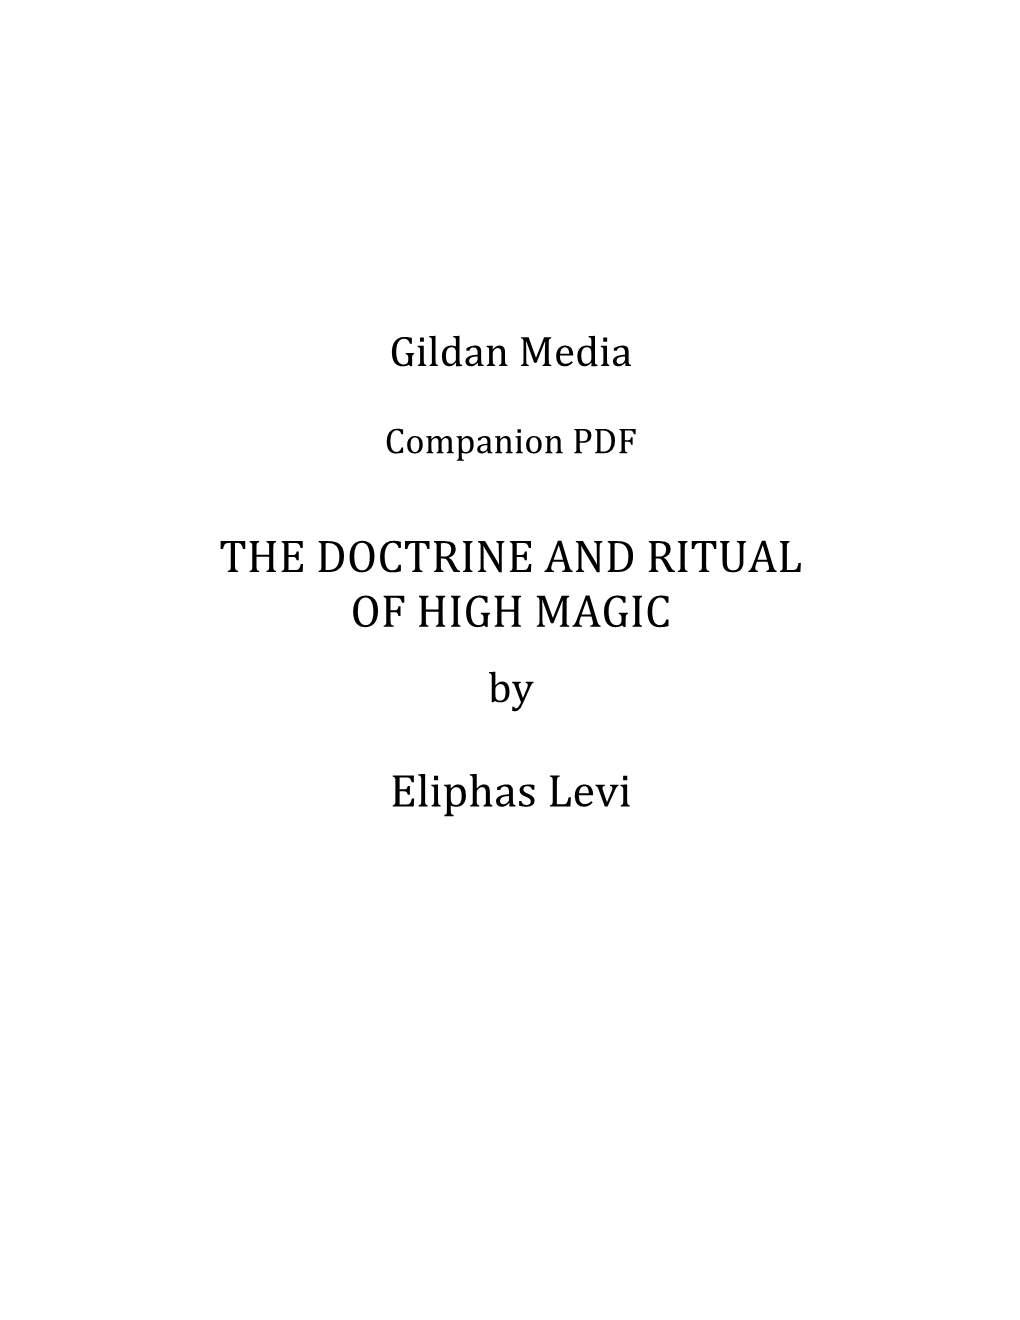 THE DOCTRINE and RITUAL of HIGH MAGIC Eliphas Levi